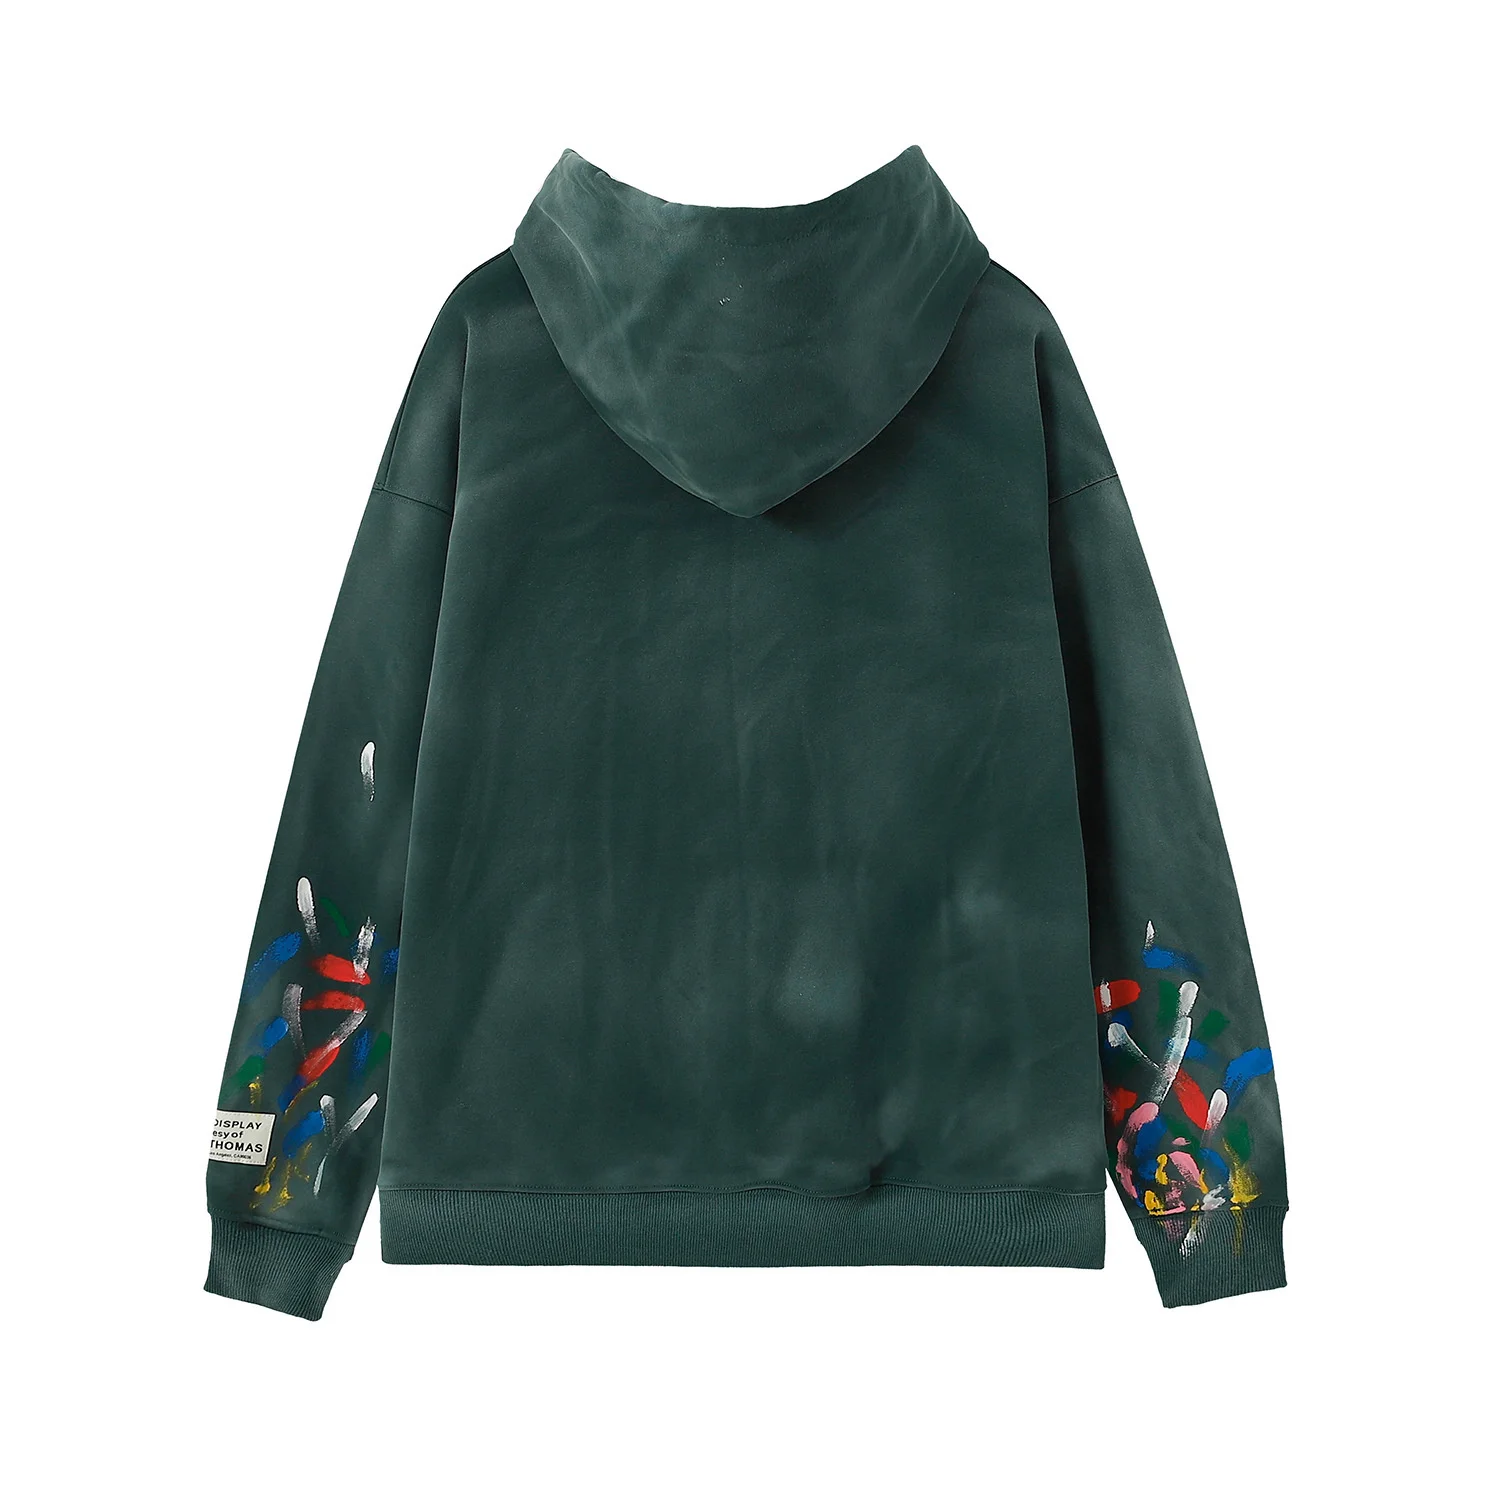 Gallery dept Fashion Sweatshirt Top Hand-painted Cotton Terry Hoodie 3